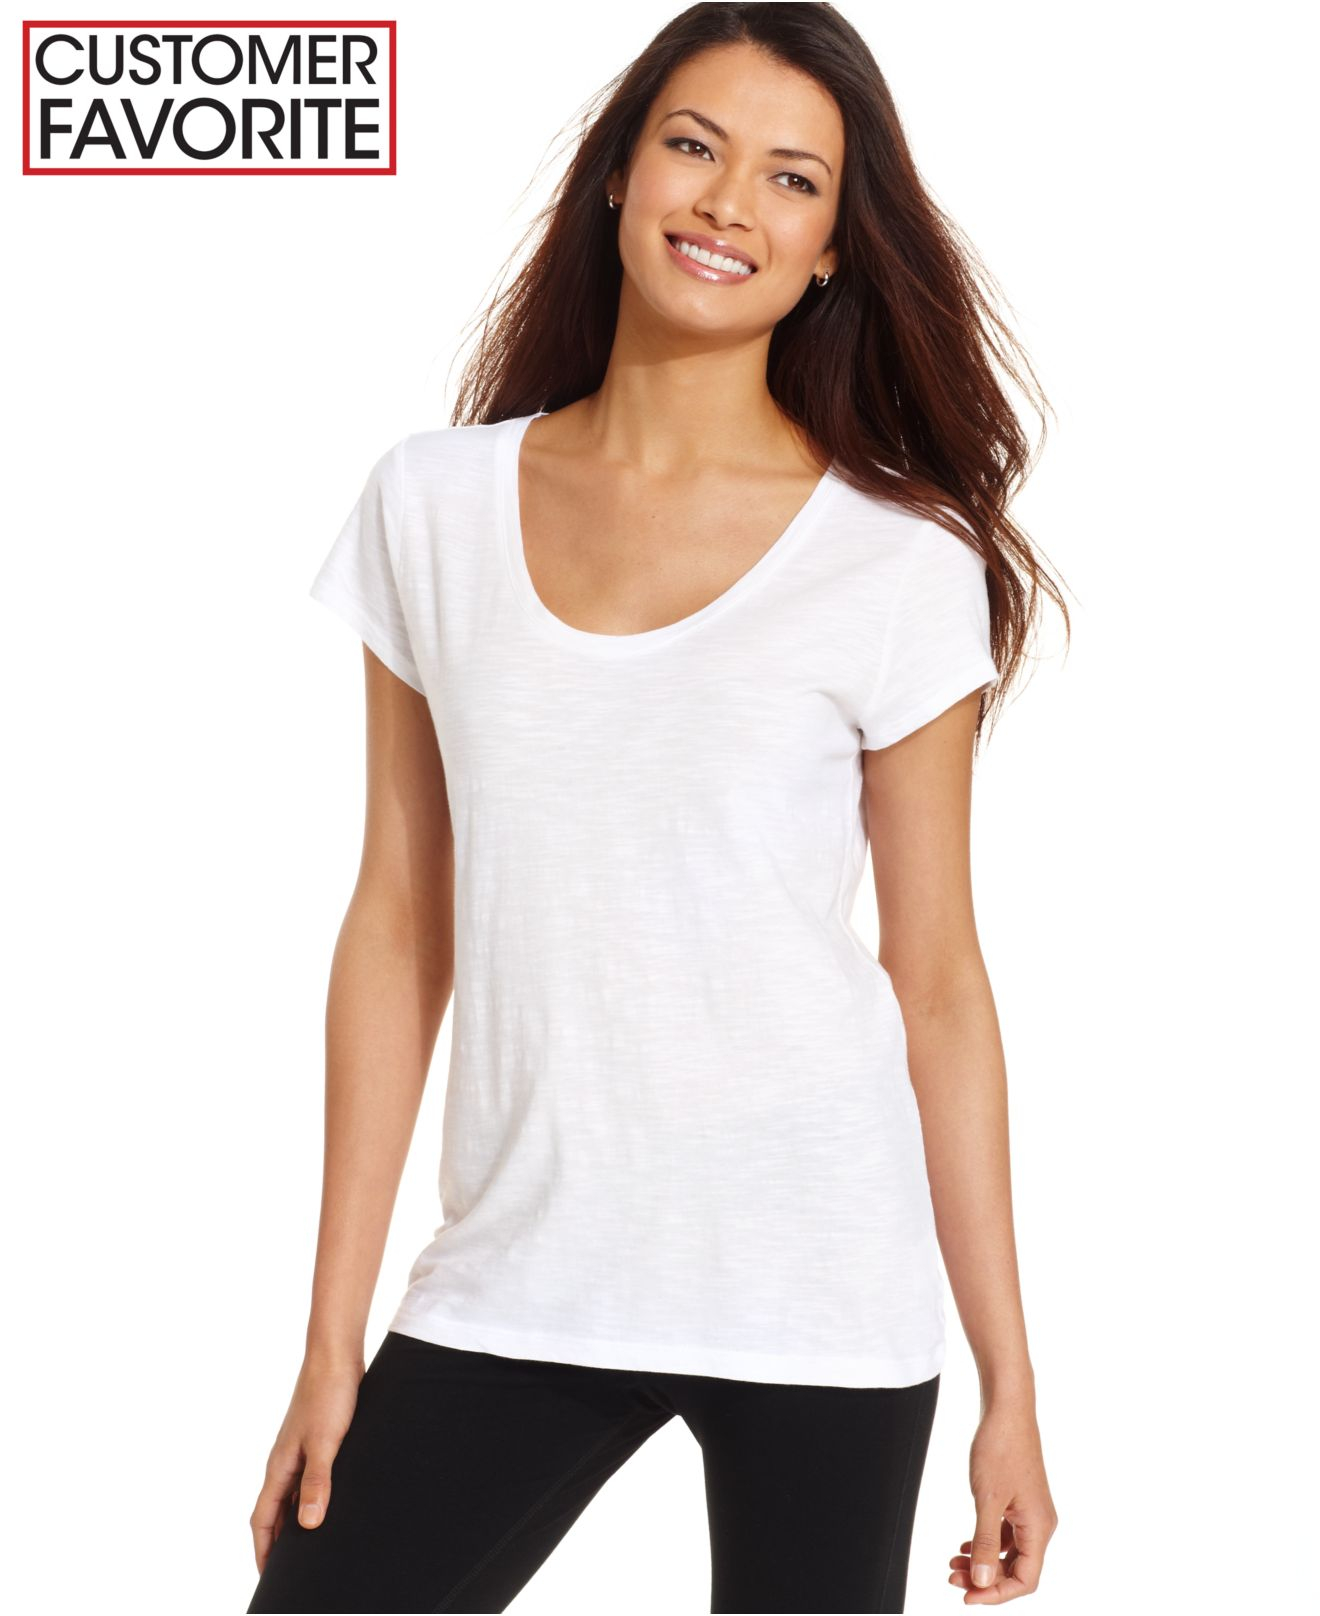 Lyst - Style & Co. Only At Macy's in White